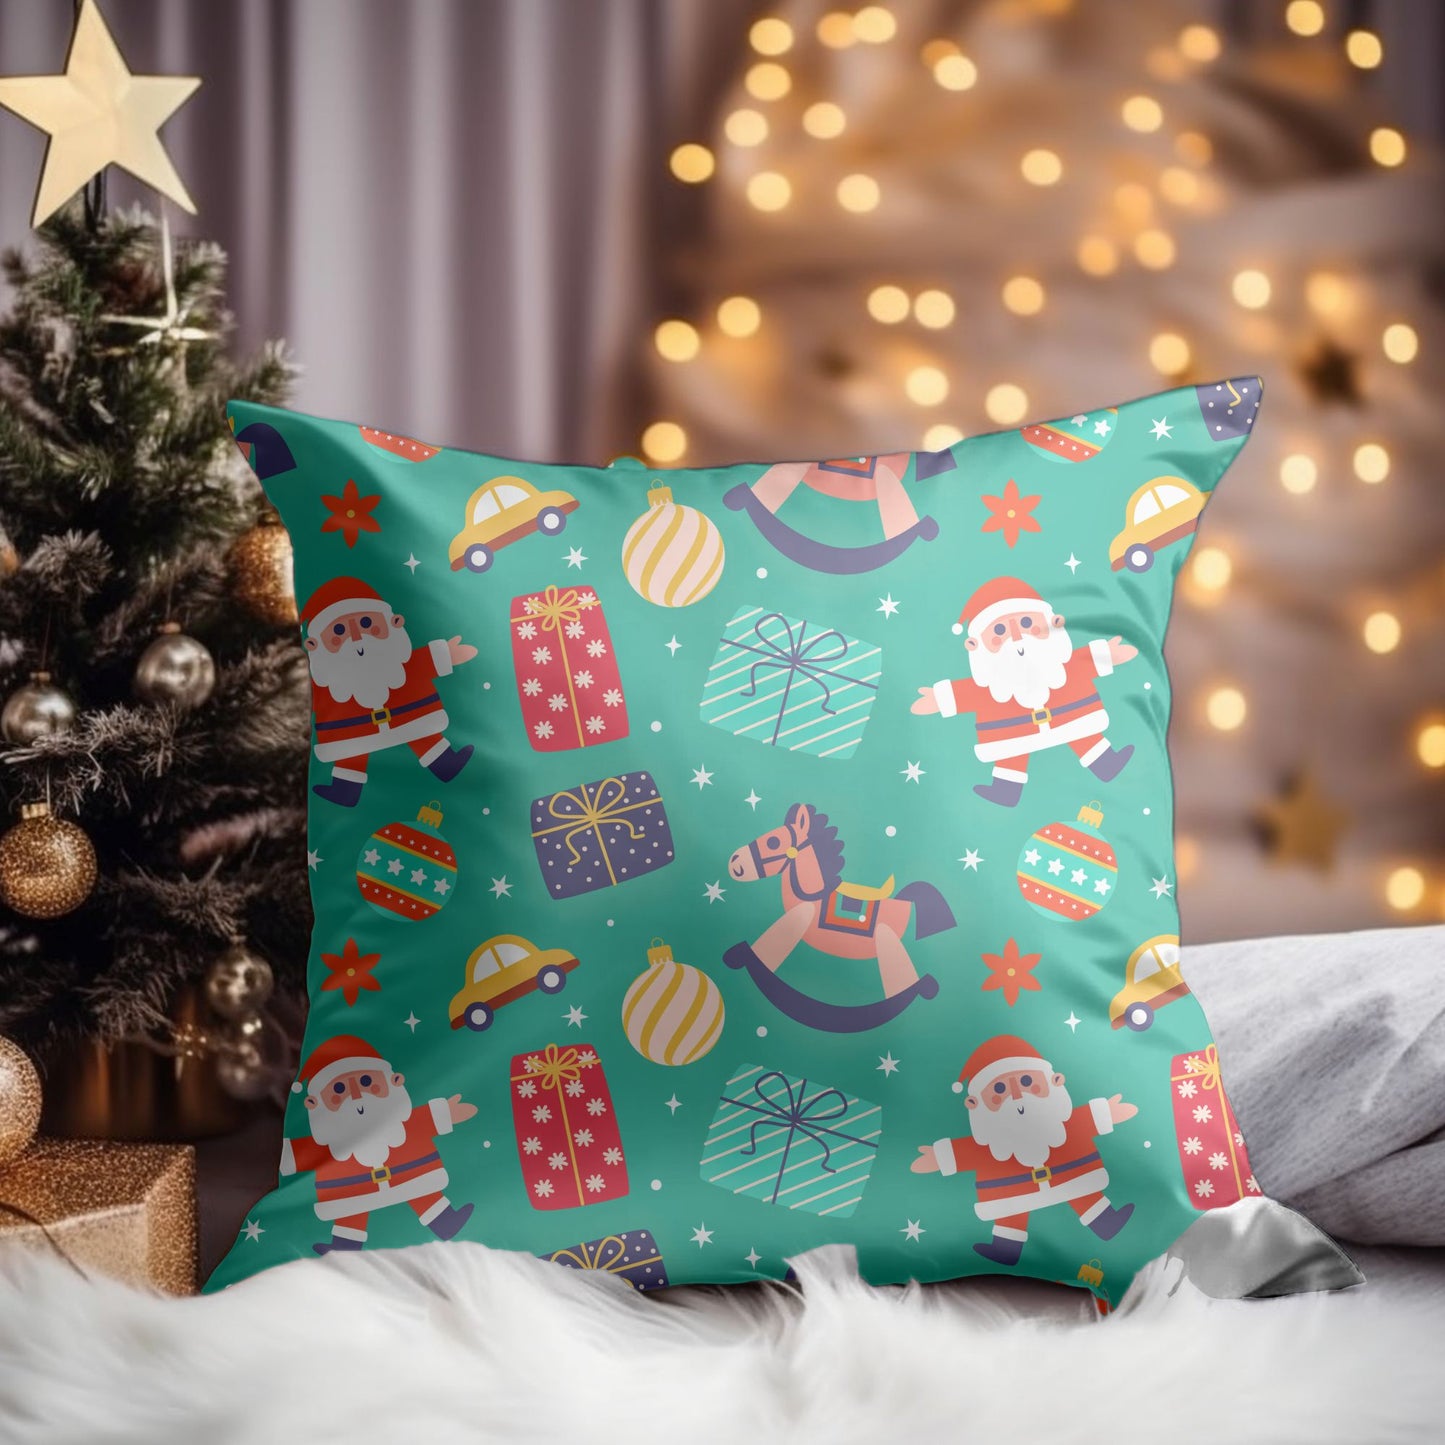 Detailed Close-up of Festive Kids' Room Christmas Pillow